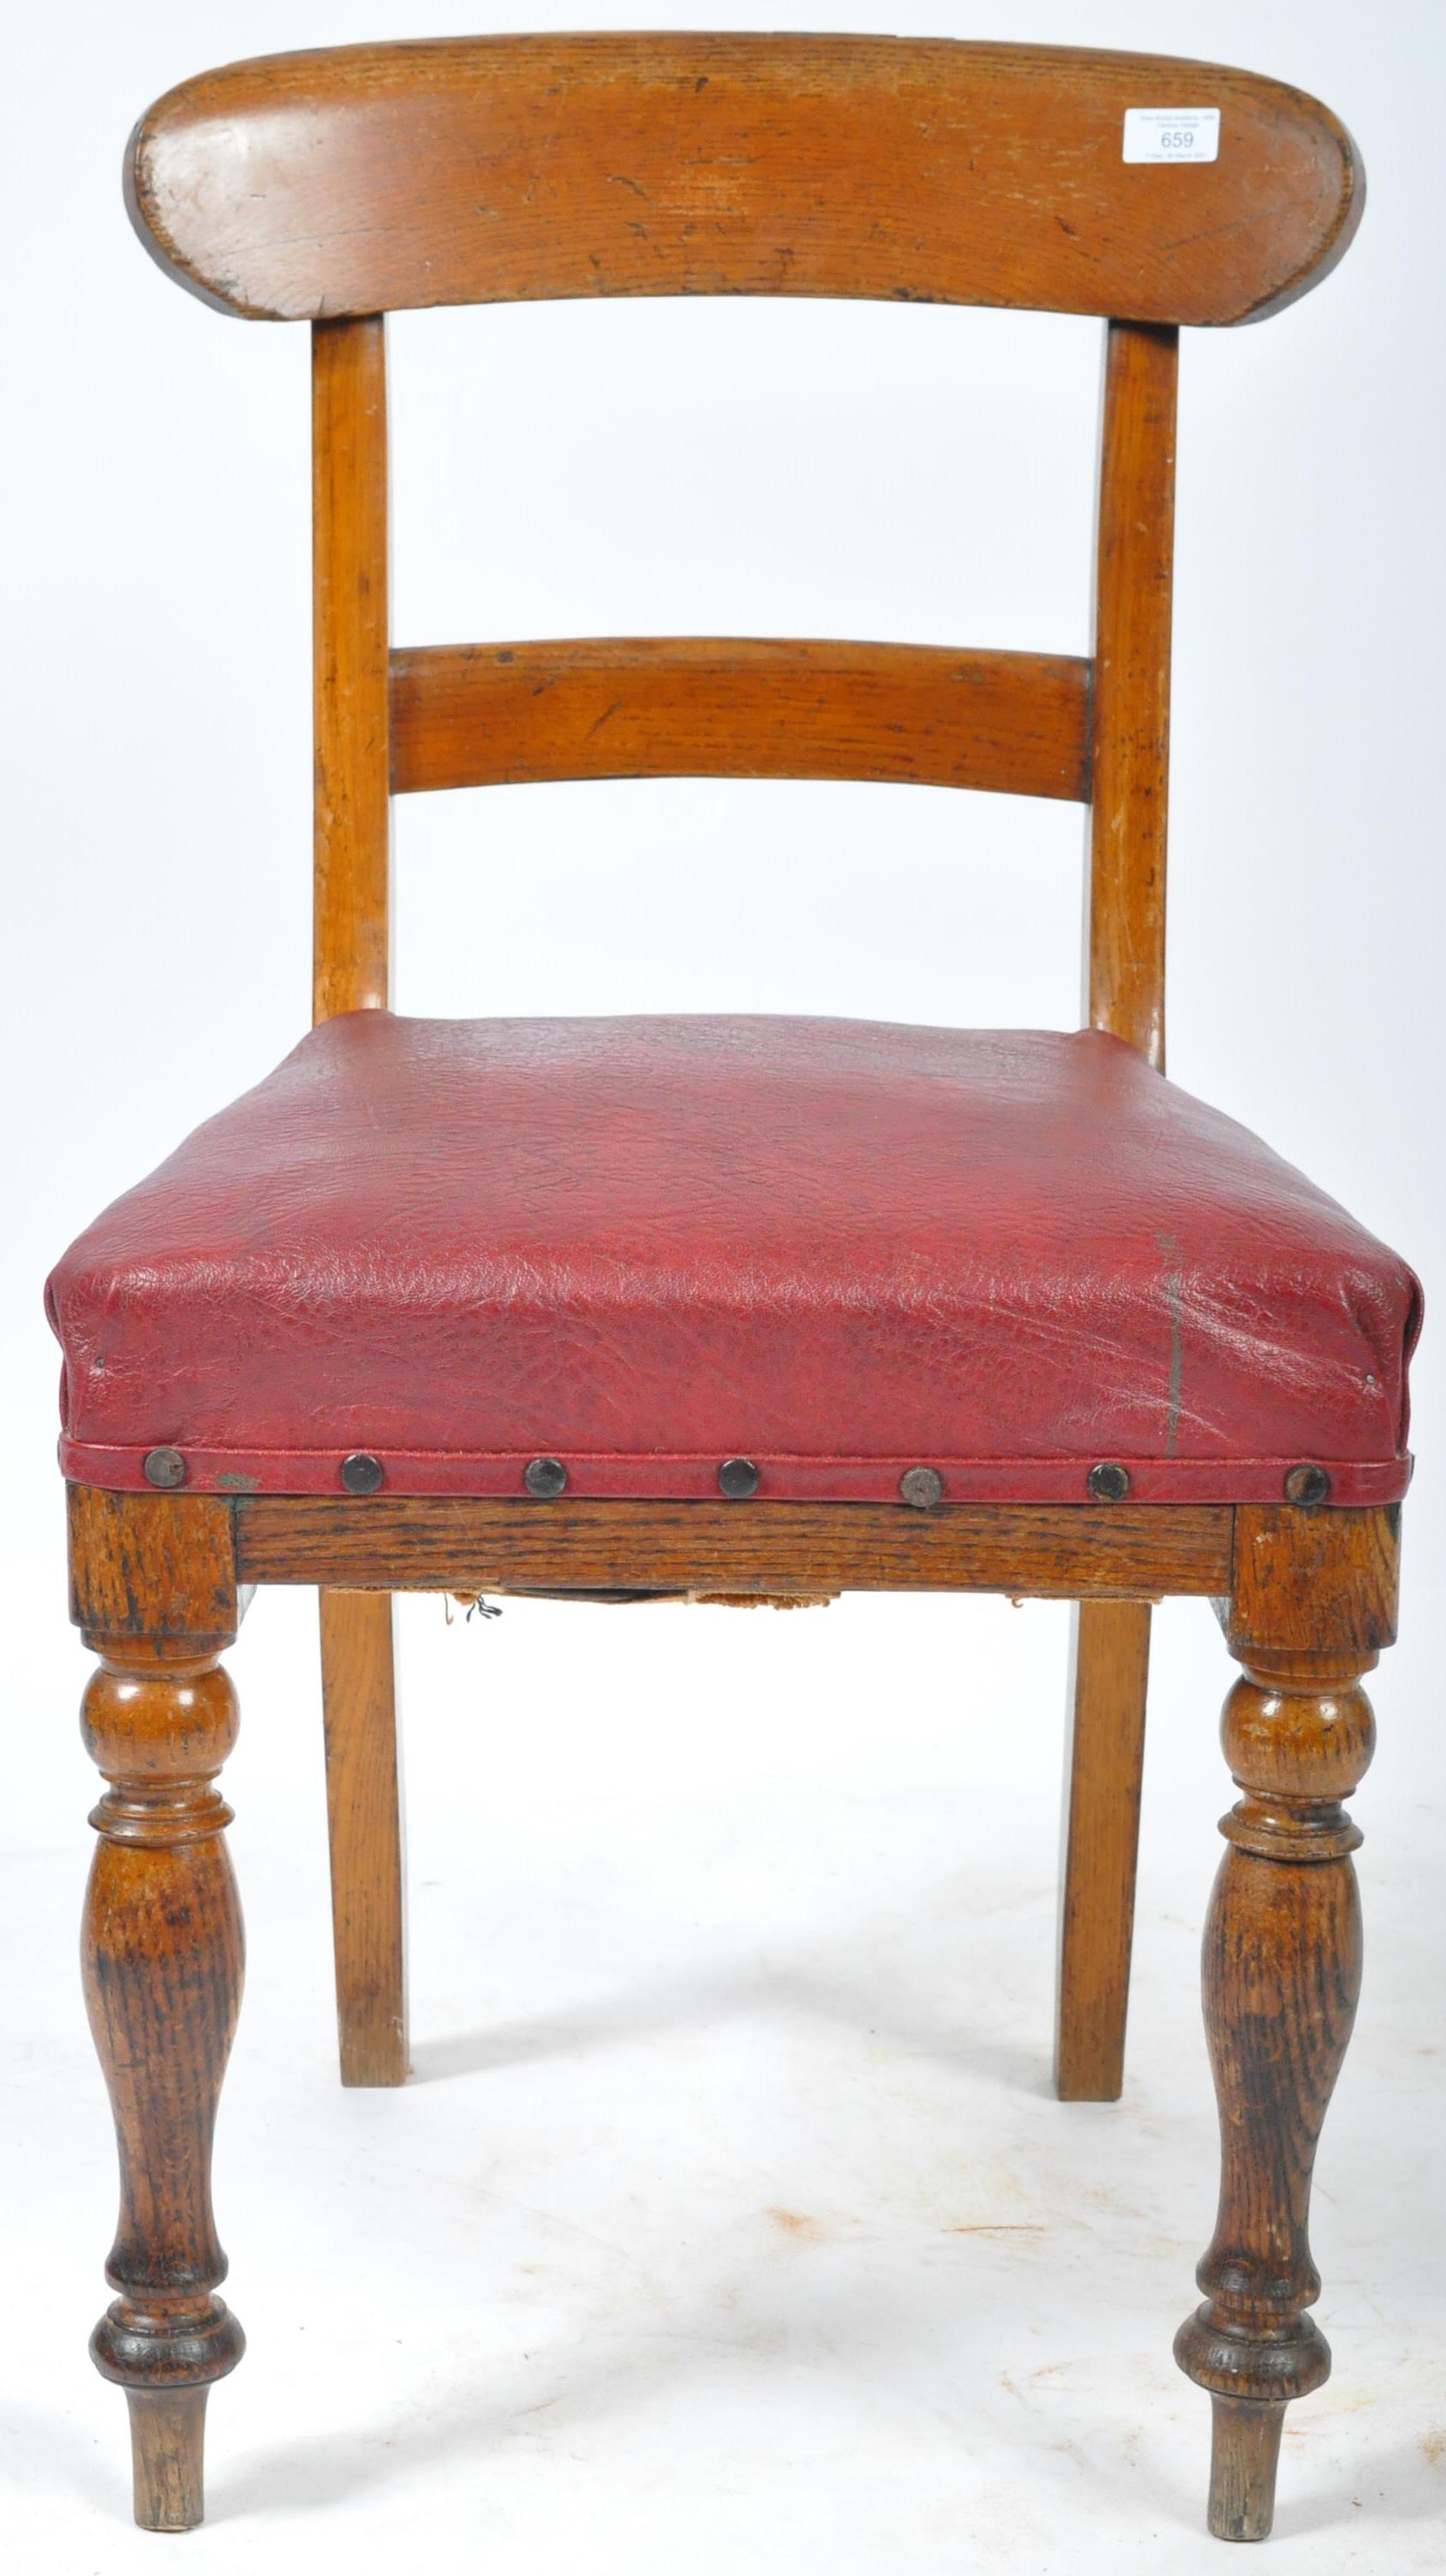 VINTAGE EARLY 20TH CENTURY OAK RAILWAY STATION CHAIR - BRISTOL - Image 7 of 9